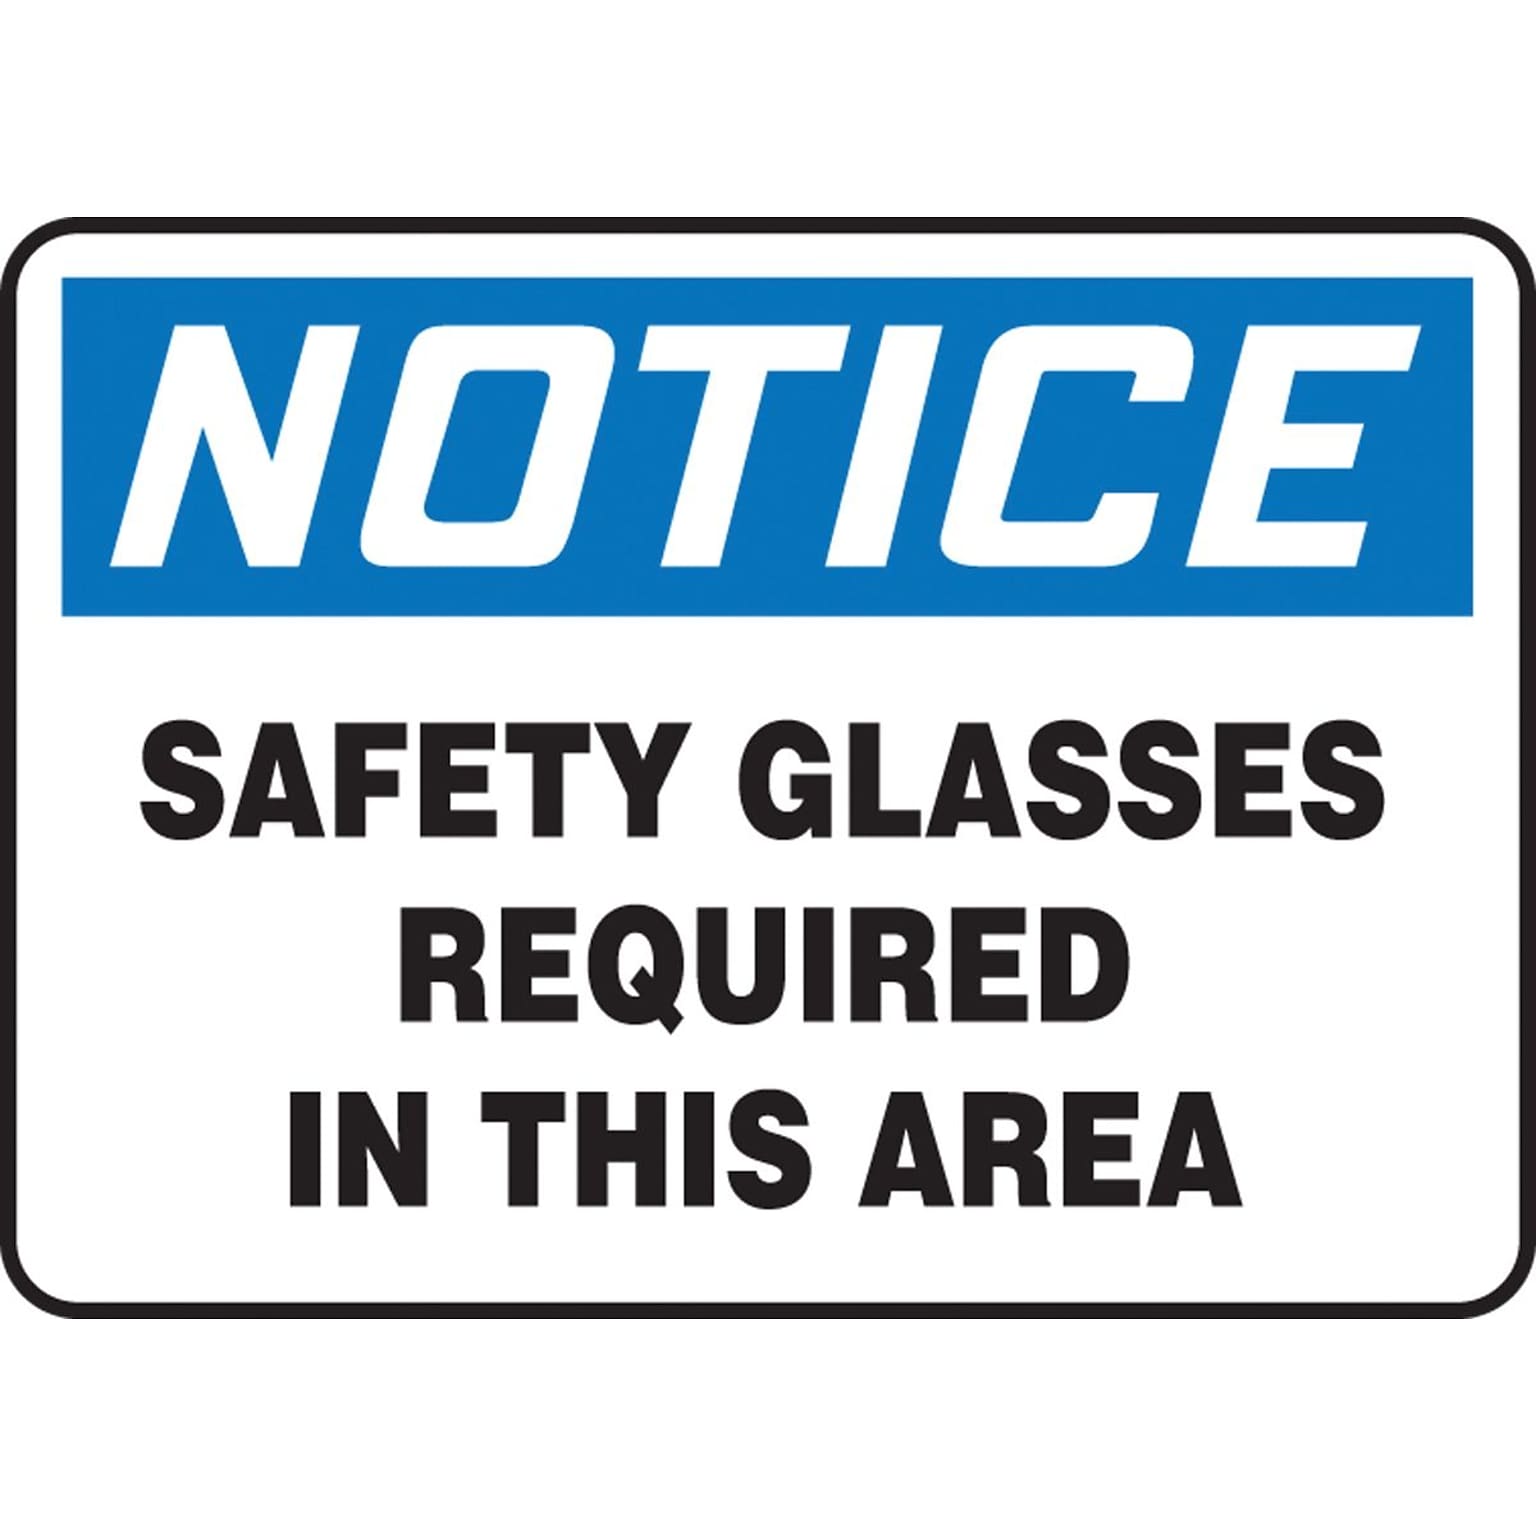 Accuform Signs® 7 x 10 Vinyl Safety Sign NOTICE SAFETY GLASSES REQUIRED.., Blue/Black On White